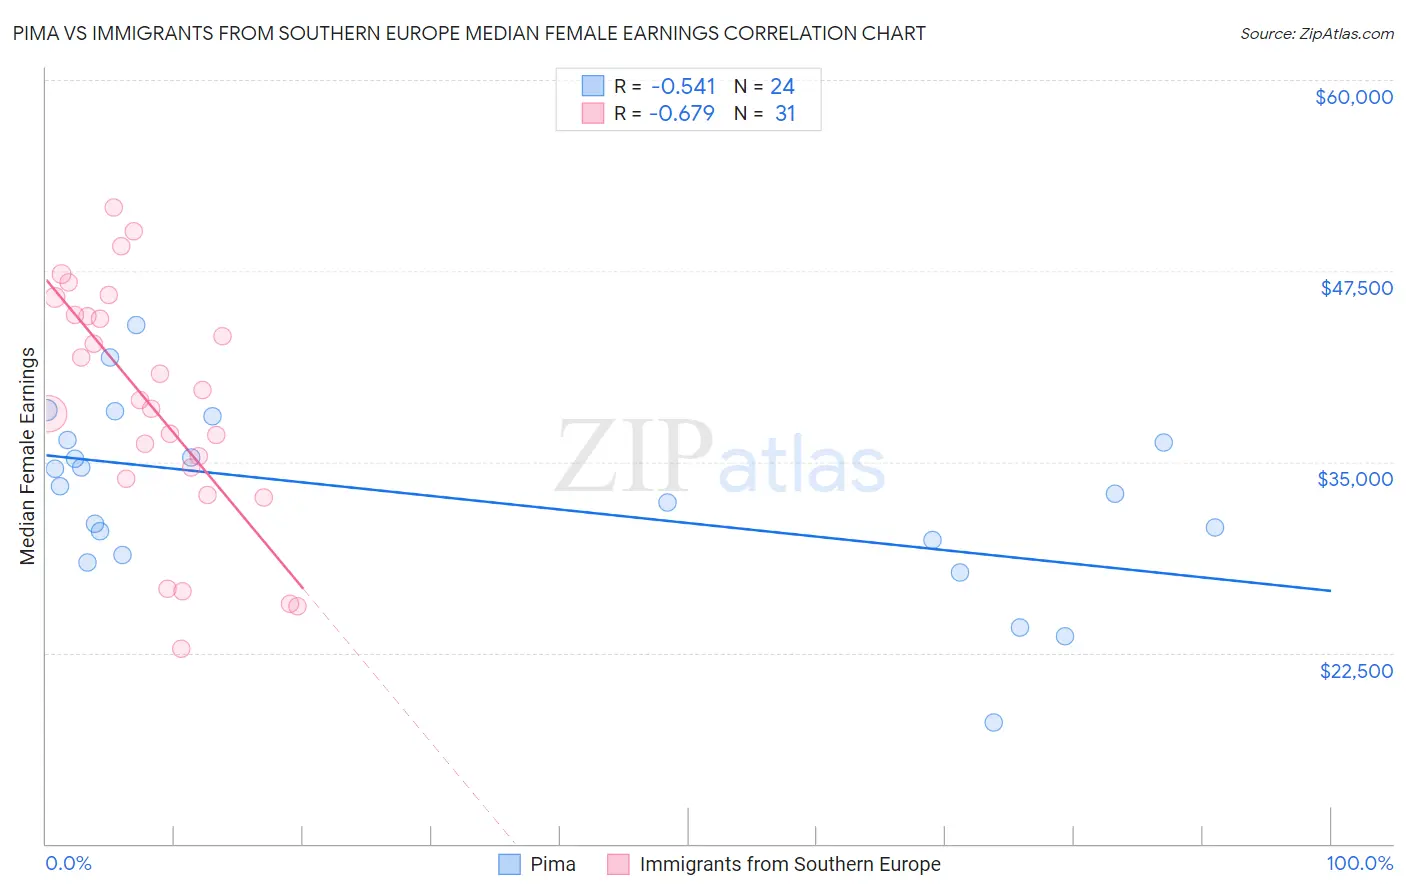 Pima vs Immigrants from Southern Europe Median Female Earnings